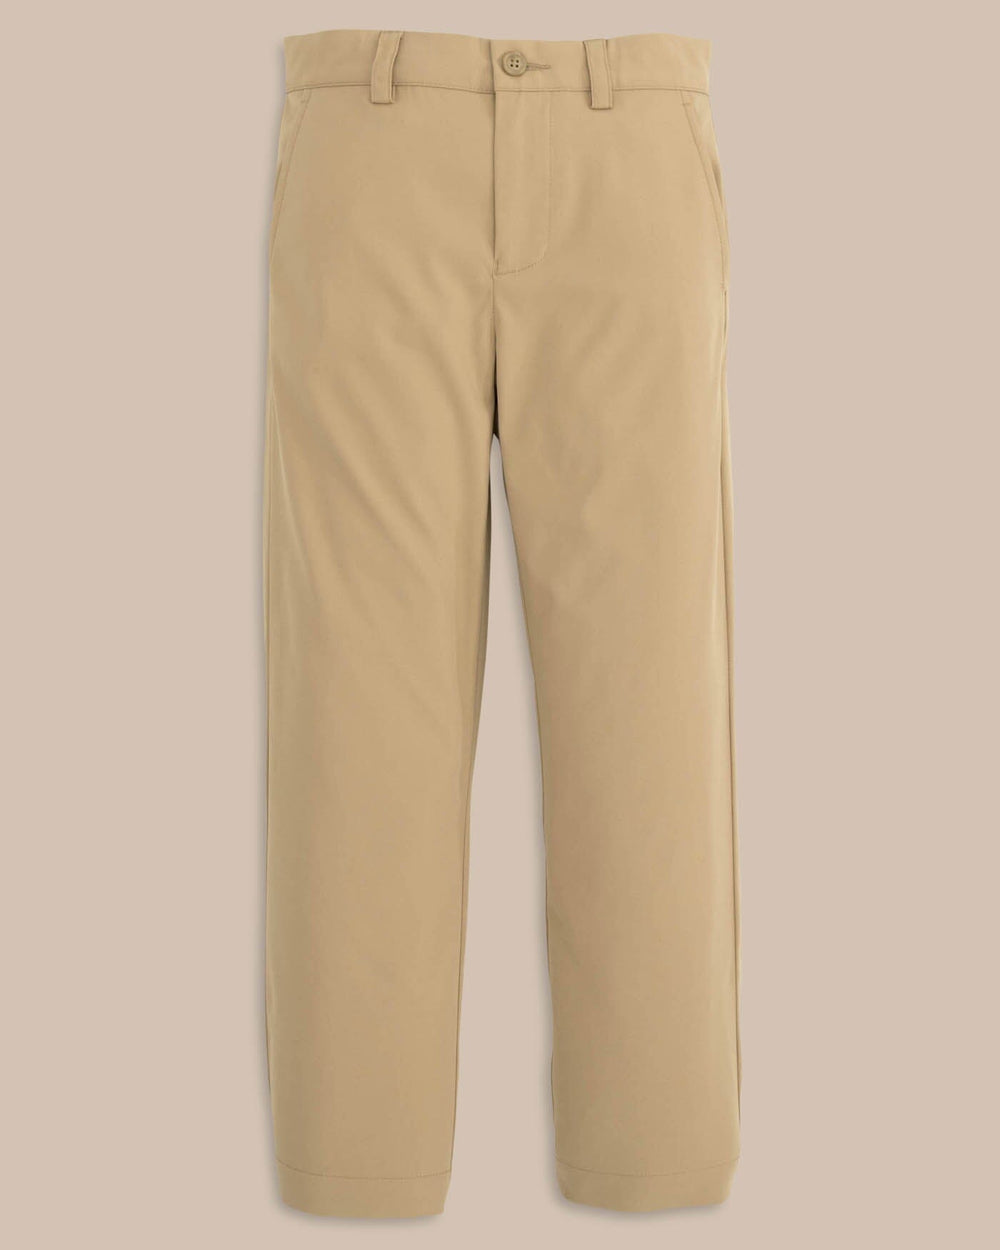 The front view of the Youth Leadhead Performance Pant by Southern Tide - Sandstone Khaki